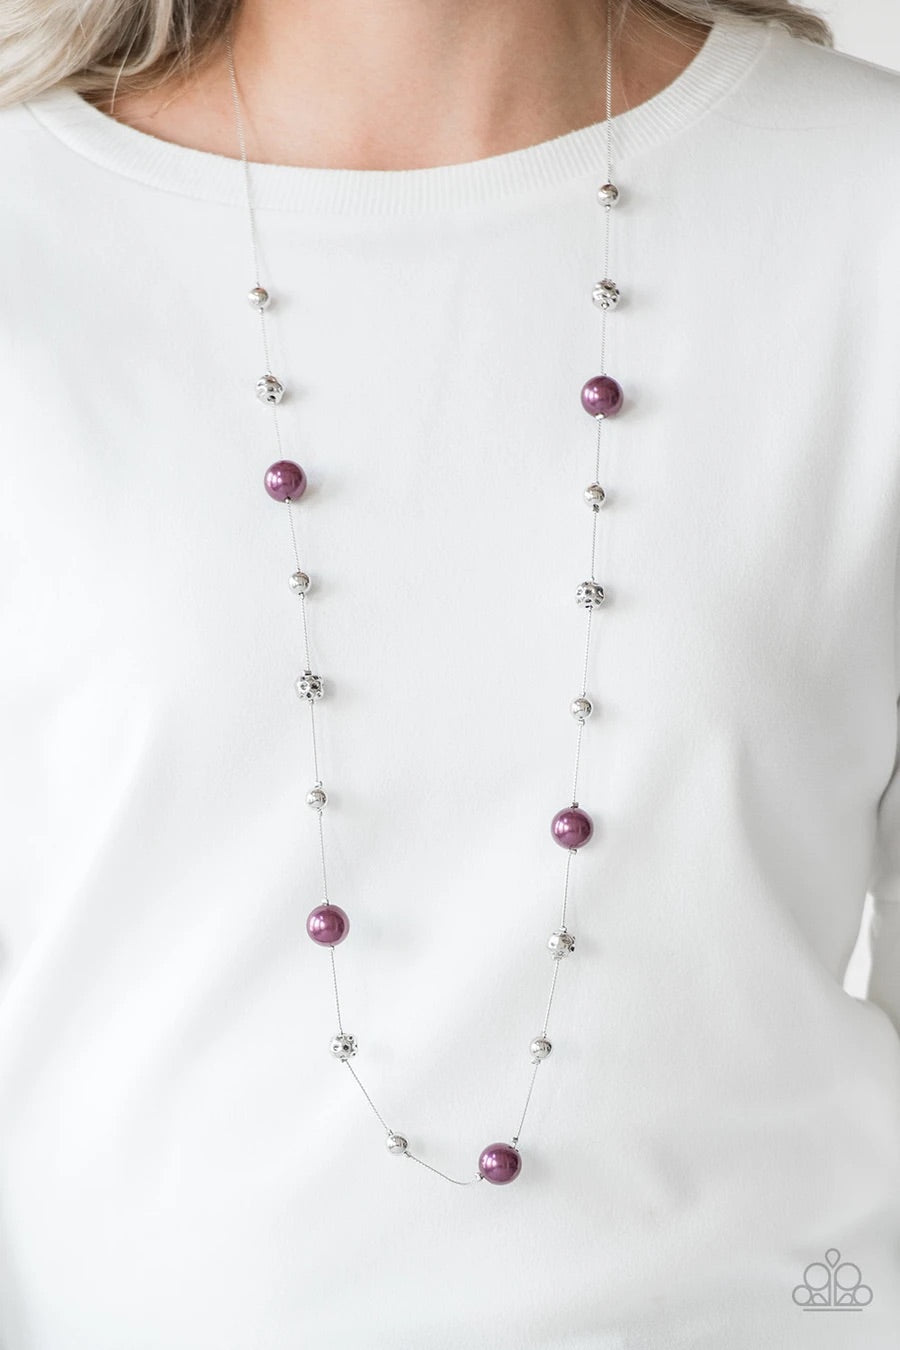 Eloquently Eloquent - Purple Necklace